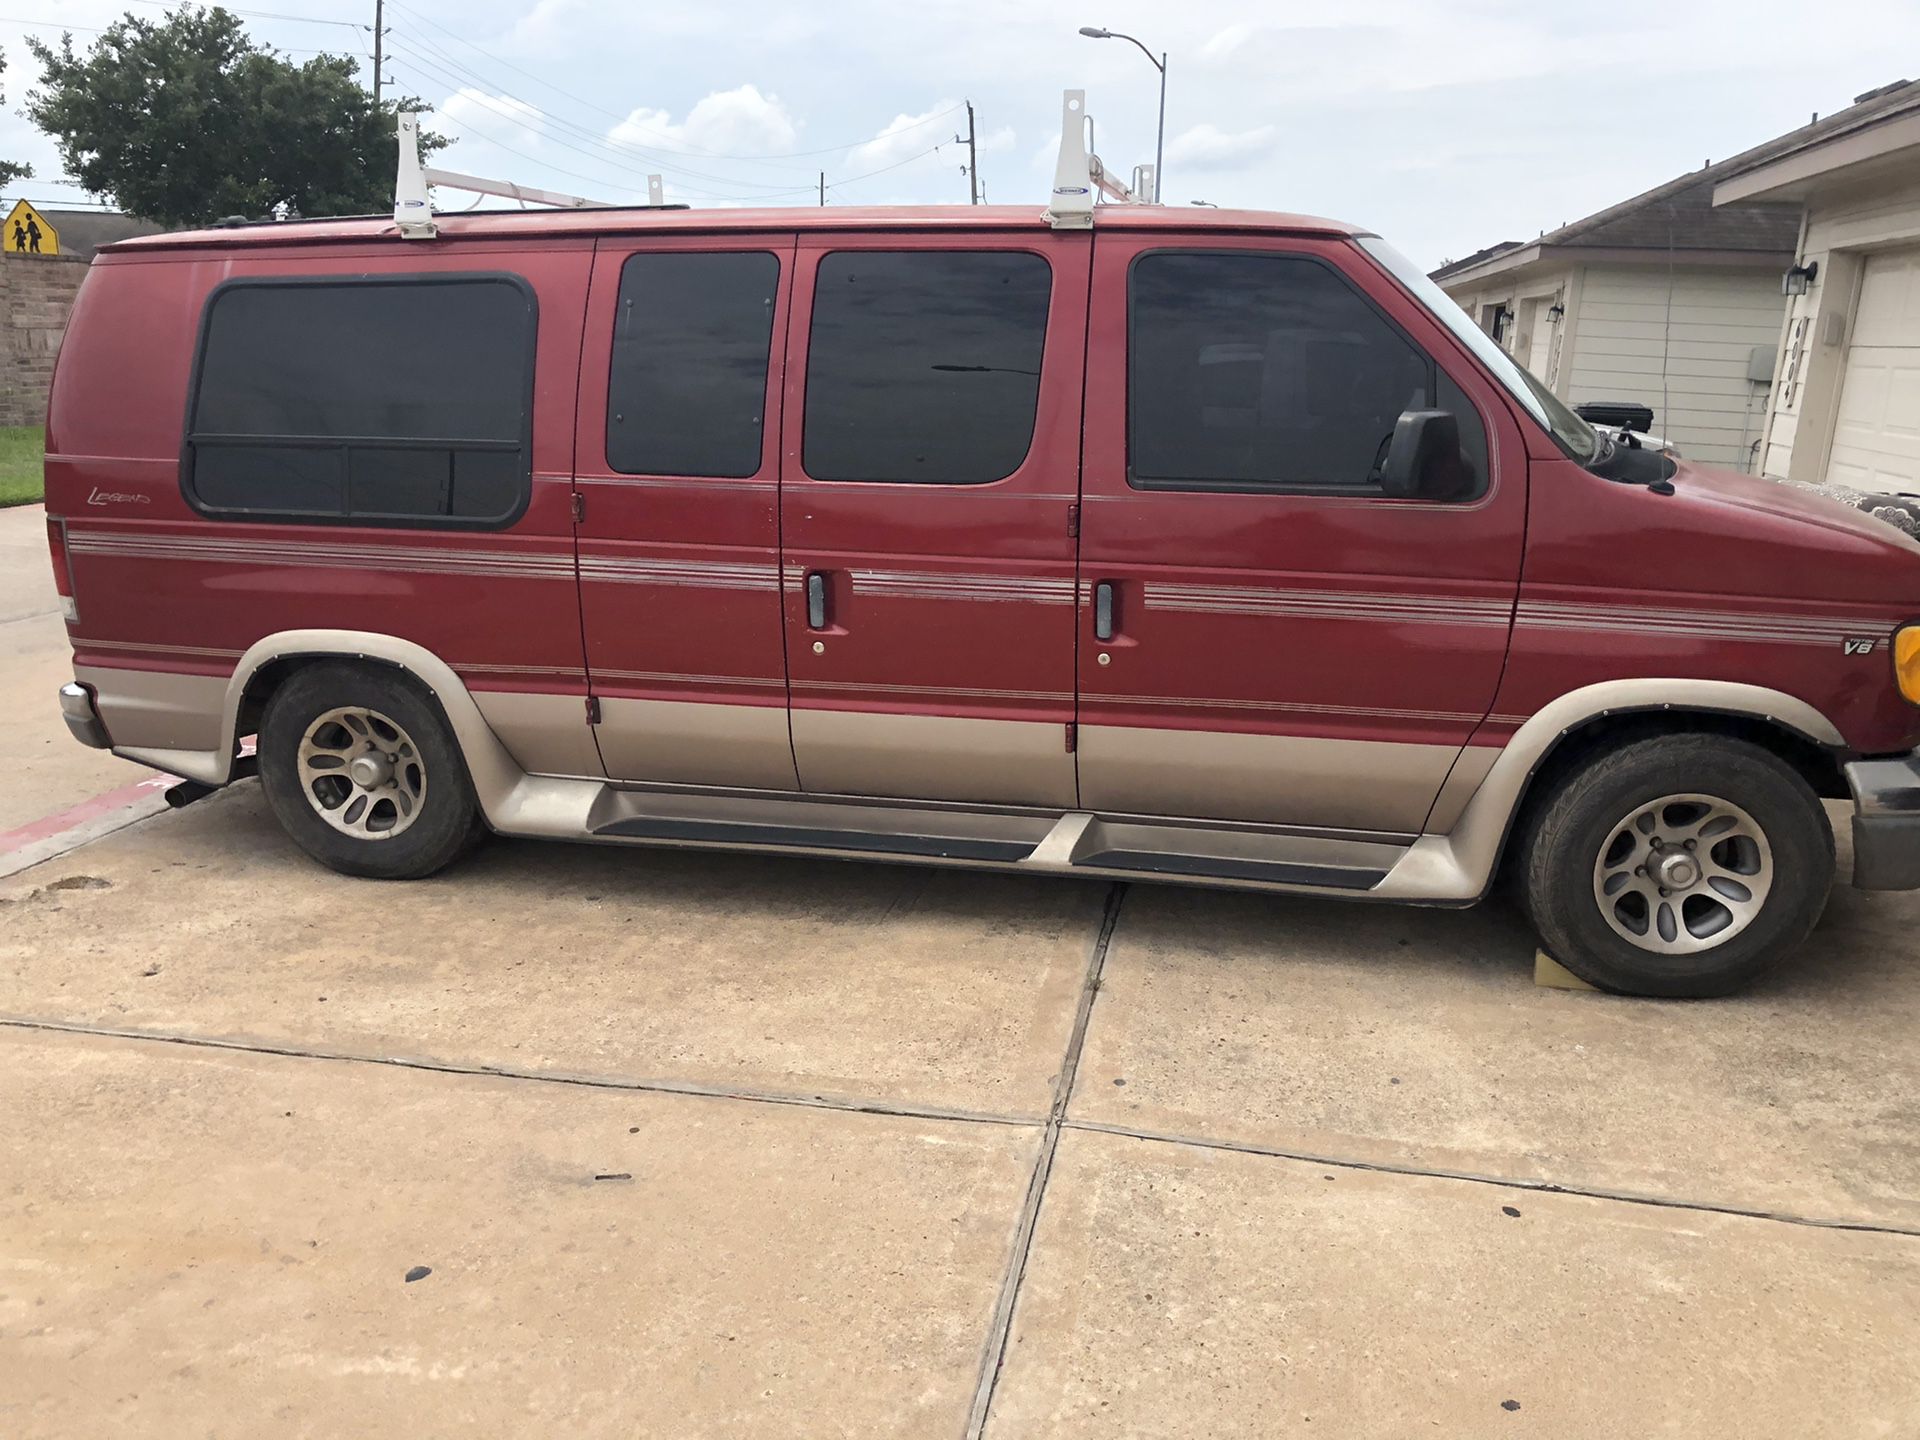 Ford econoline 150 1998 for sale must go ASAP Buyer must provide towing